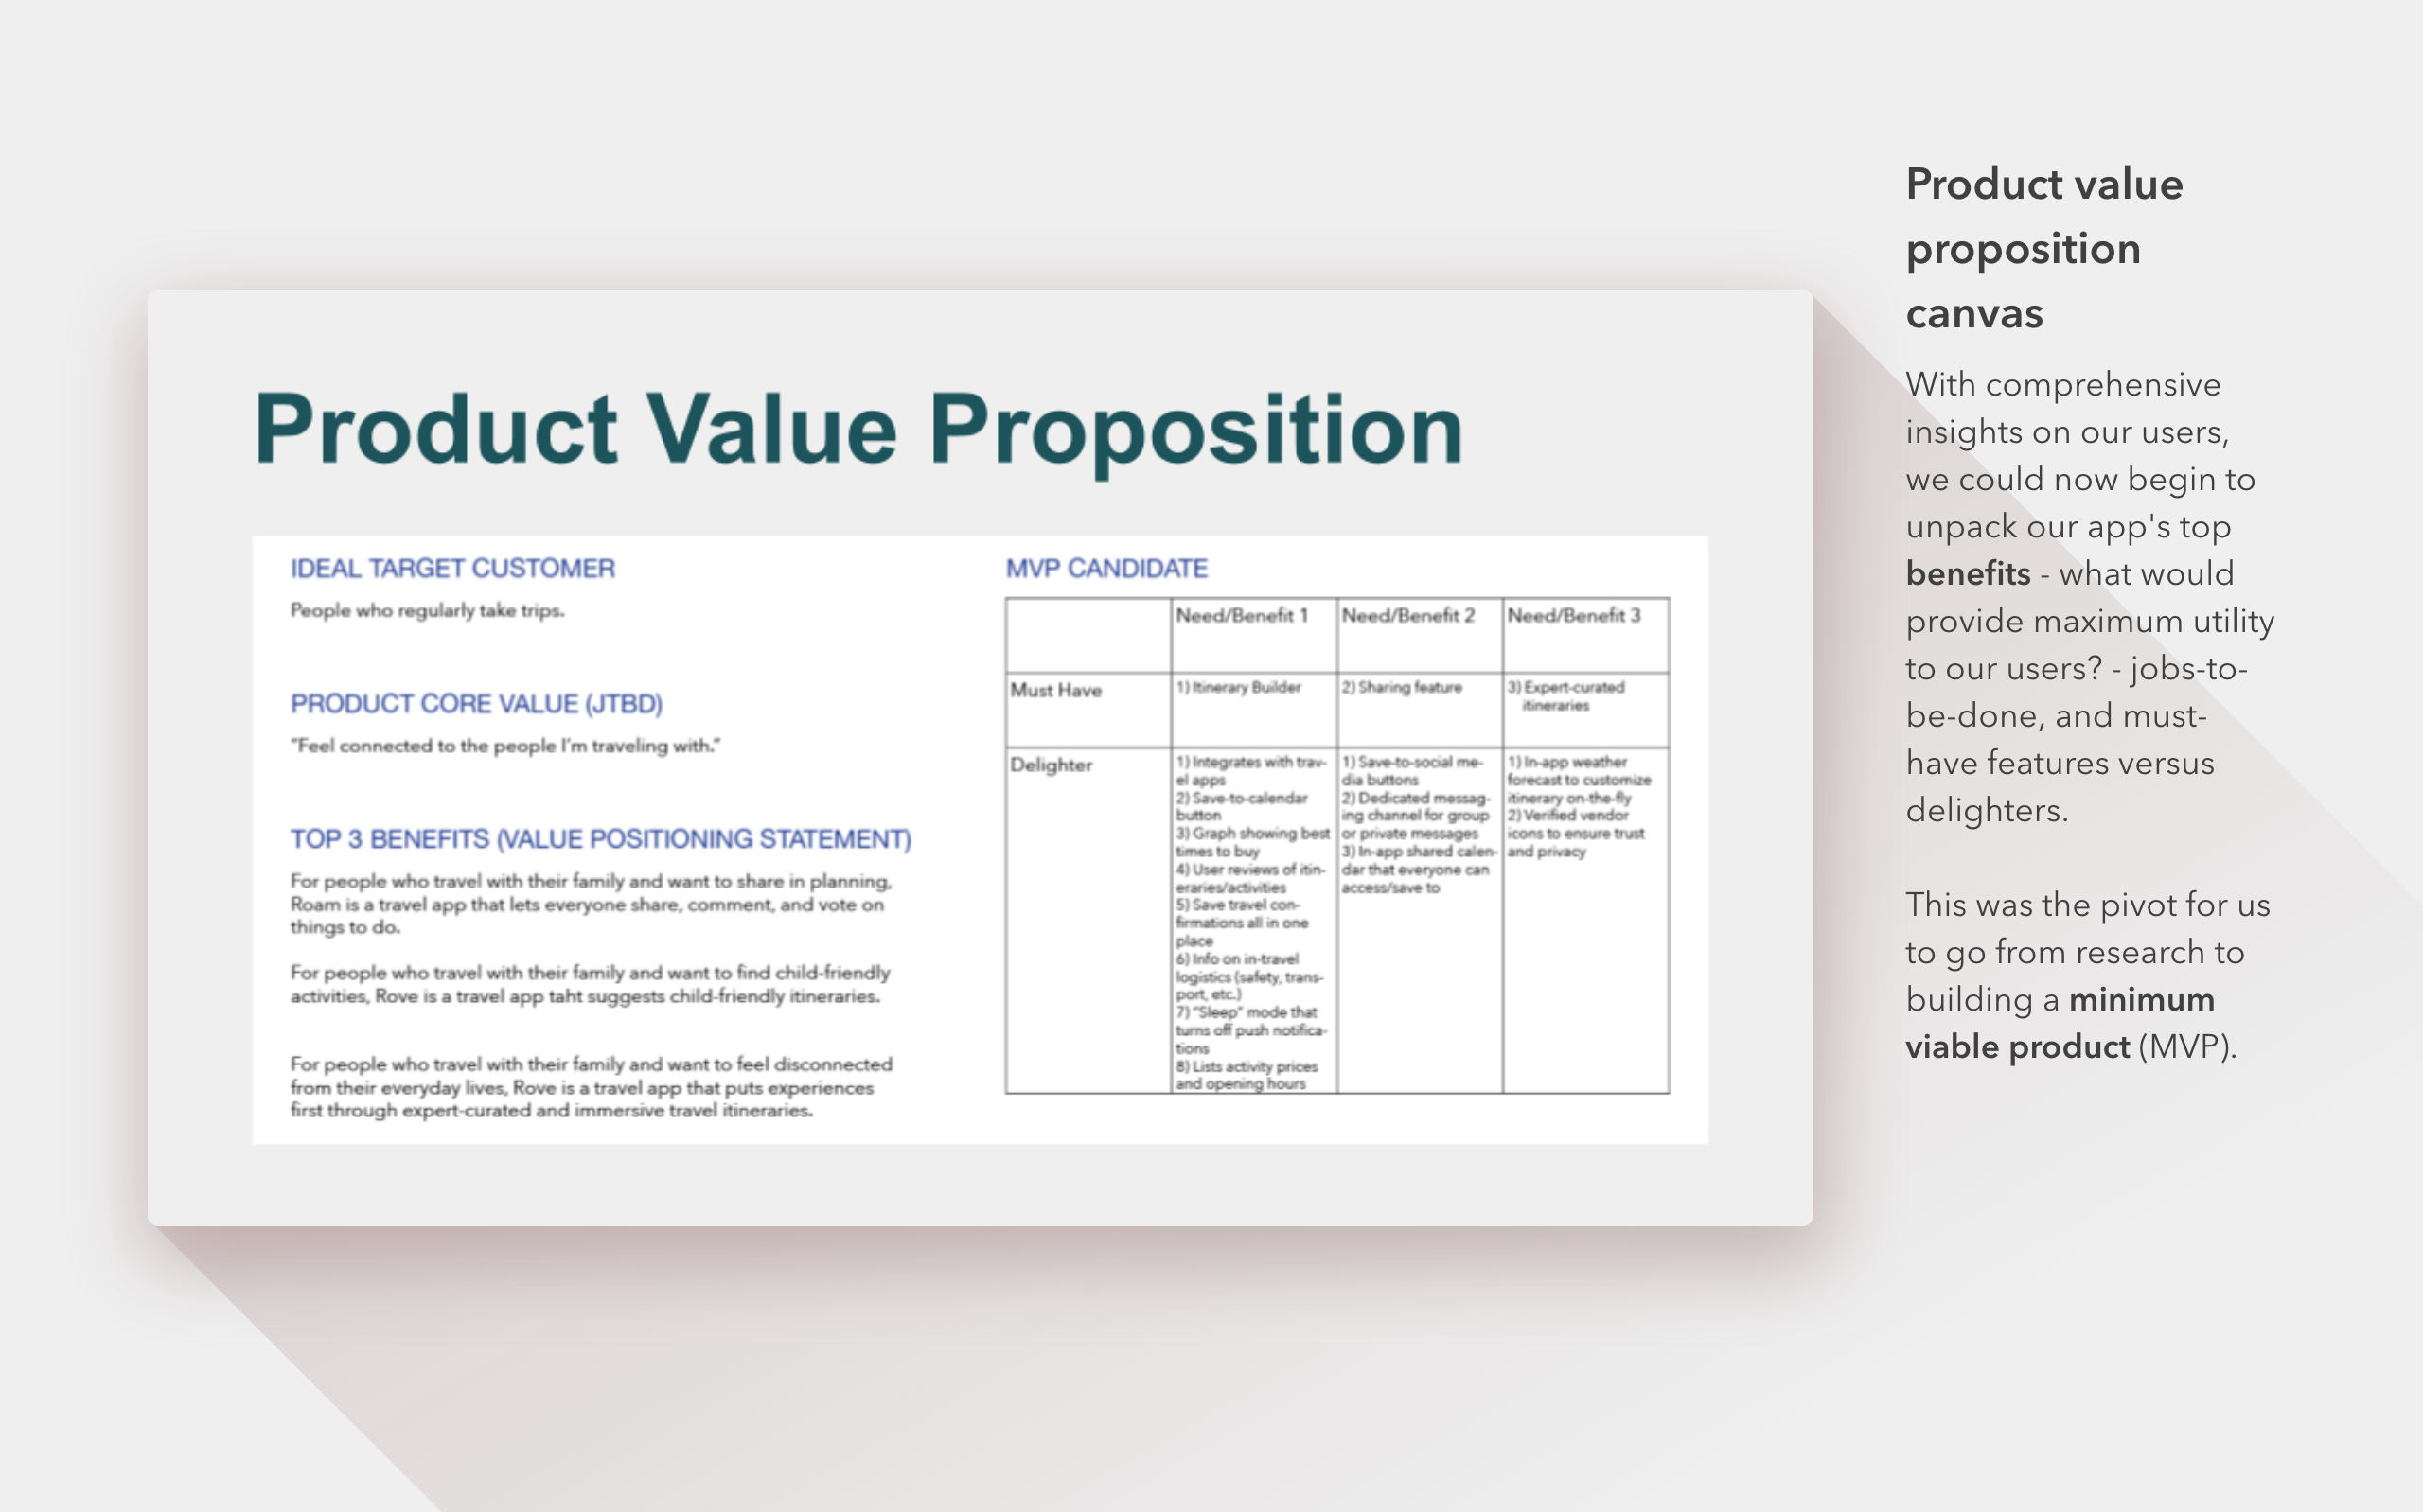 identifying product value proposition for our mvp, including must-haves and delighters